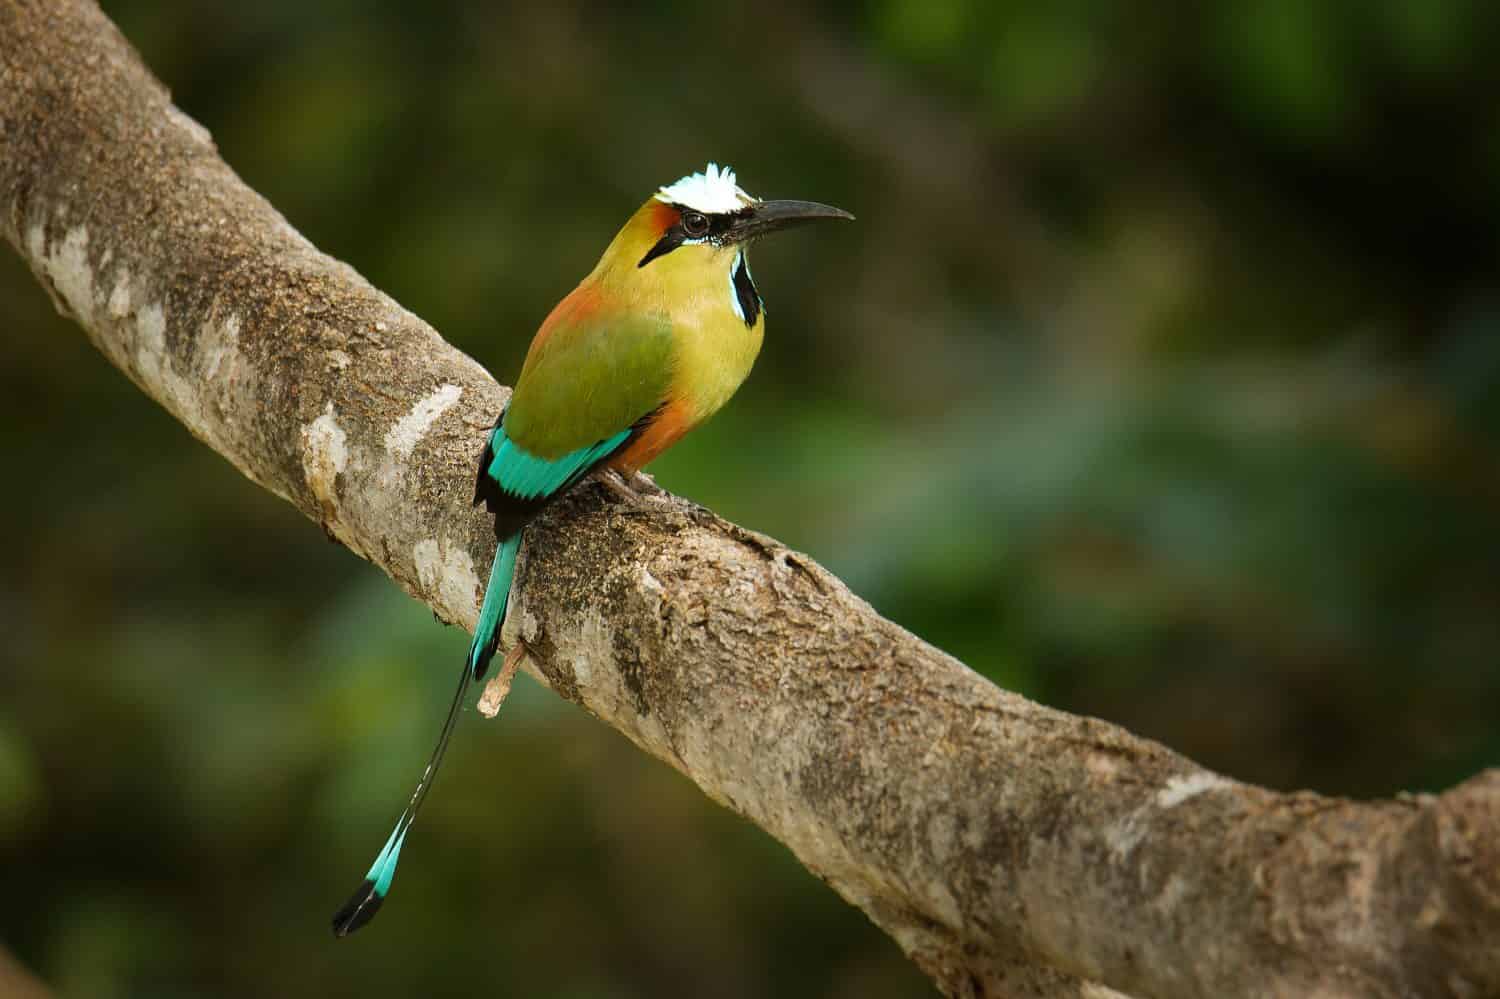 Turquoise-browed motmot - Eumomota superciliosa also Torogoz, colourful tropical bird Momotidae with long tail, Central America from south-east Mexico to Costa Rica. Colourful bird on the branch.